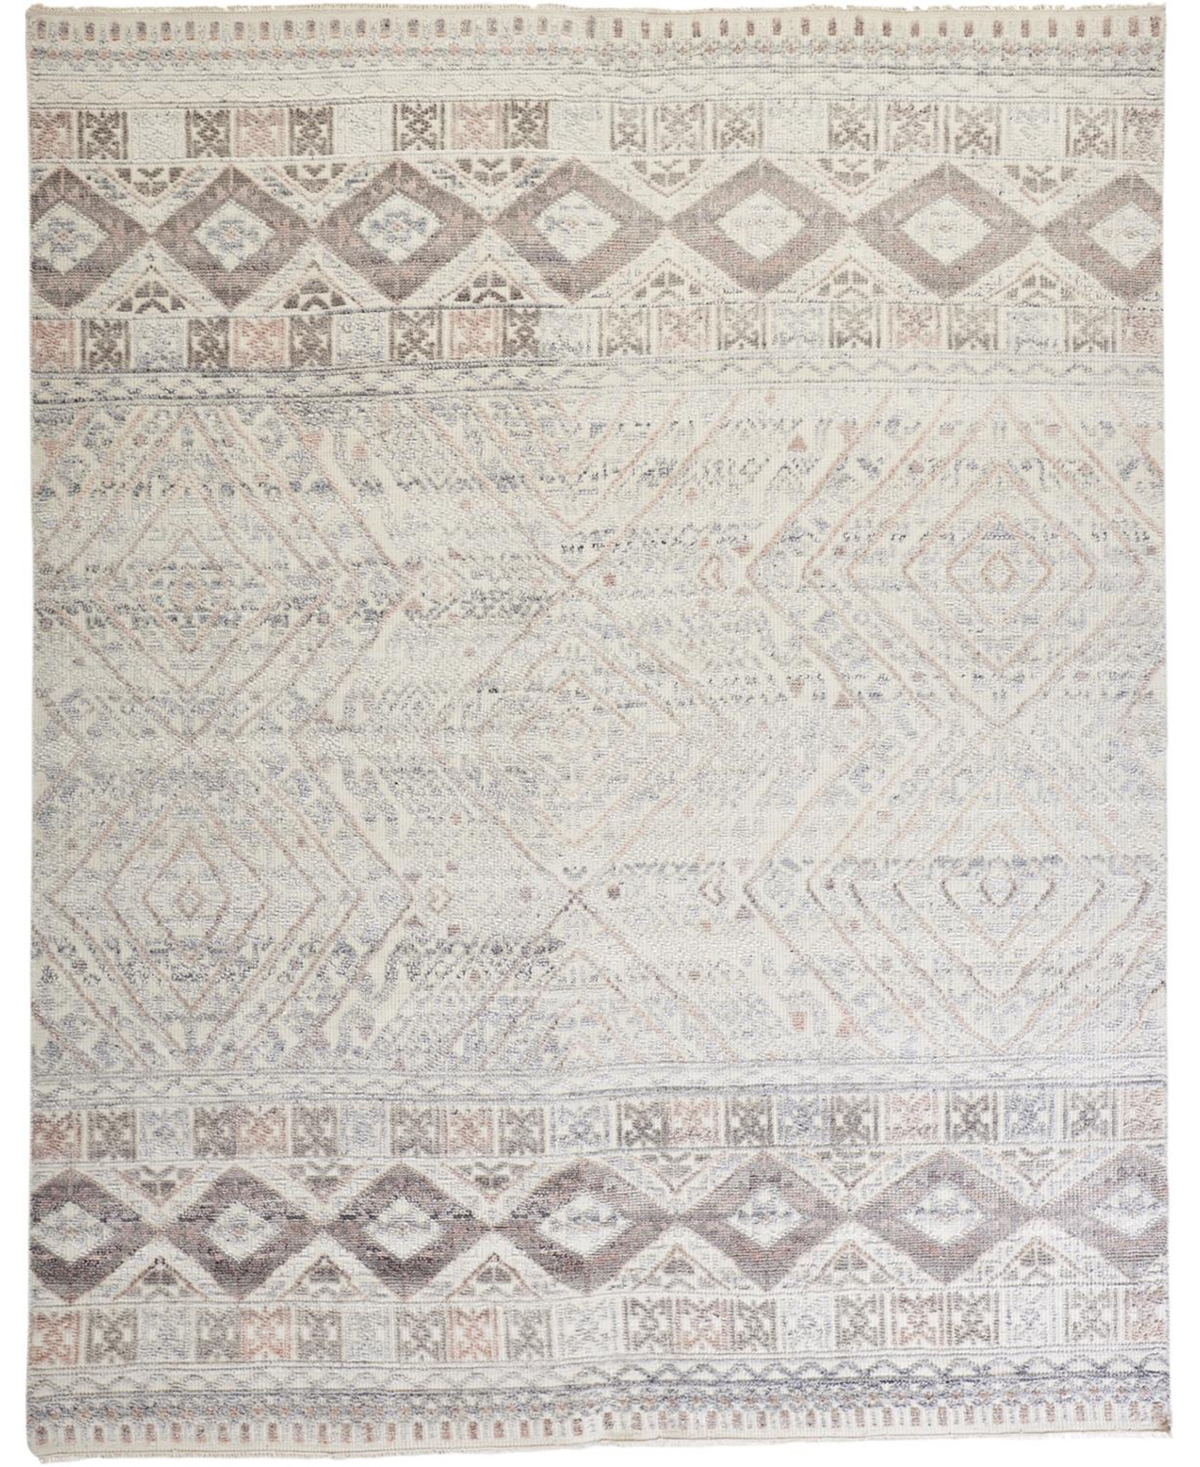 Feizy Esther EST6495 8'6in x 11'6in Area Rug - Ivory, Pink